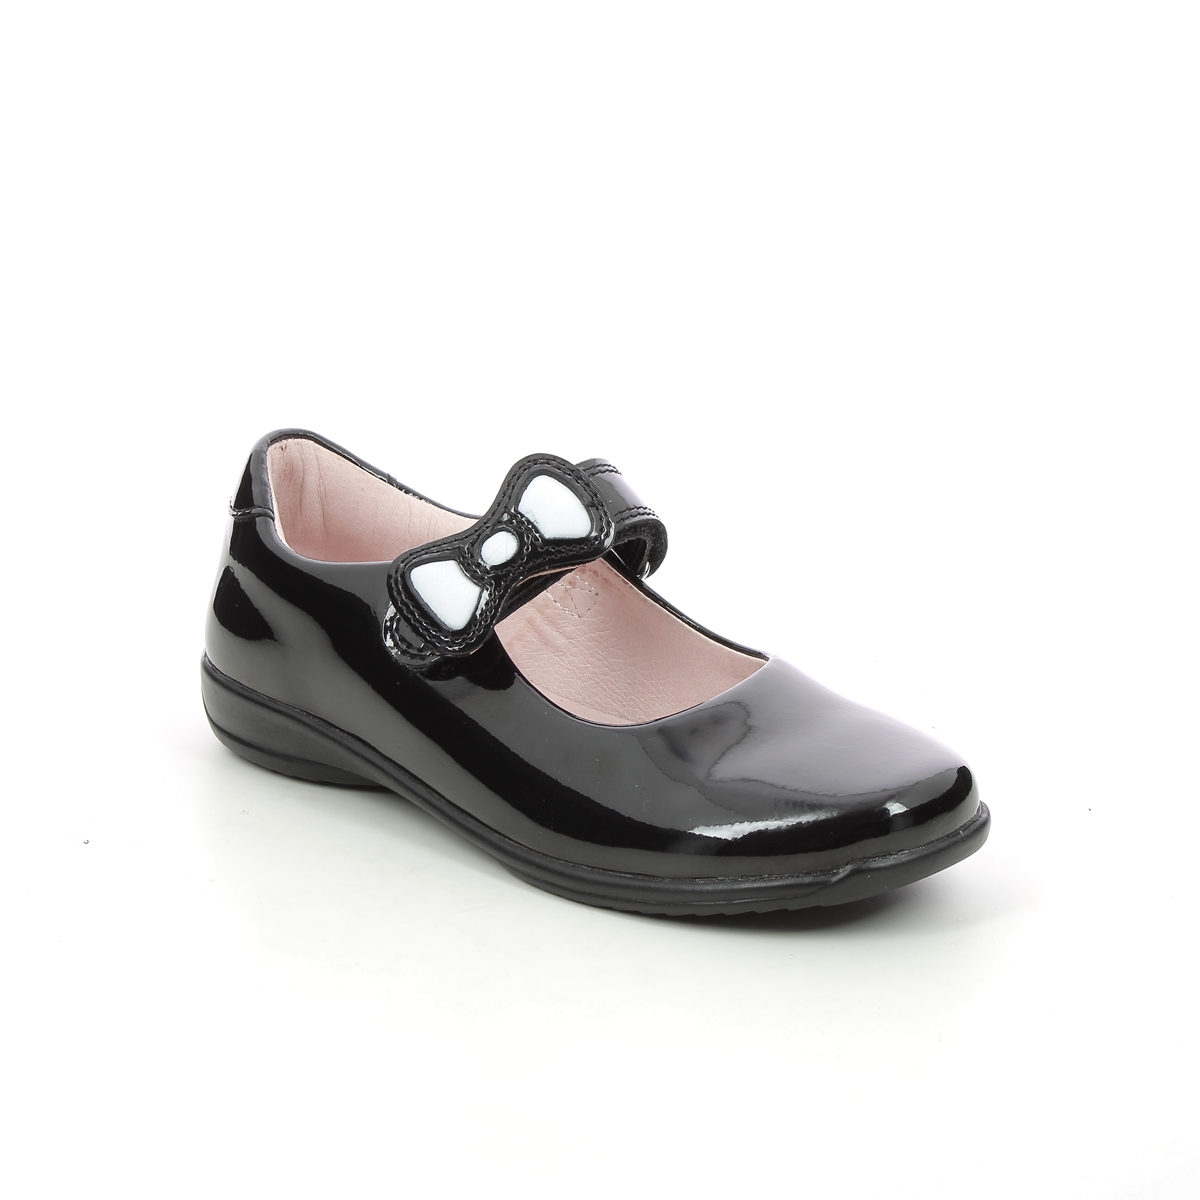 Lelli Kelly - Colourissima Bow F Fit In Black Patent Lk8802-Db01 In Size 30 In Plain Black Patent Girls Shoes  In Black Patent For School For kids